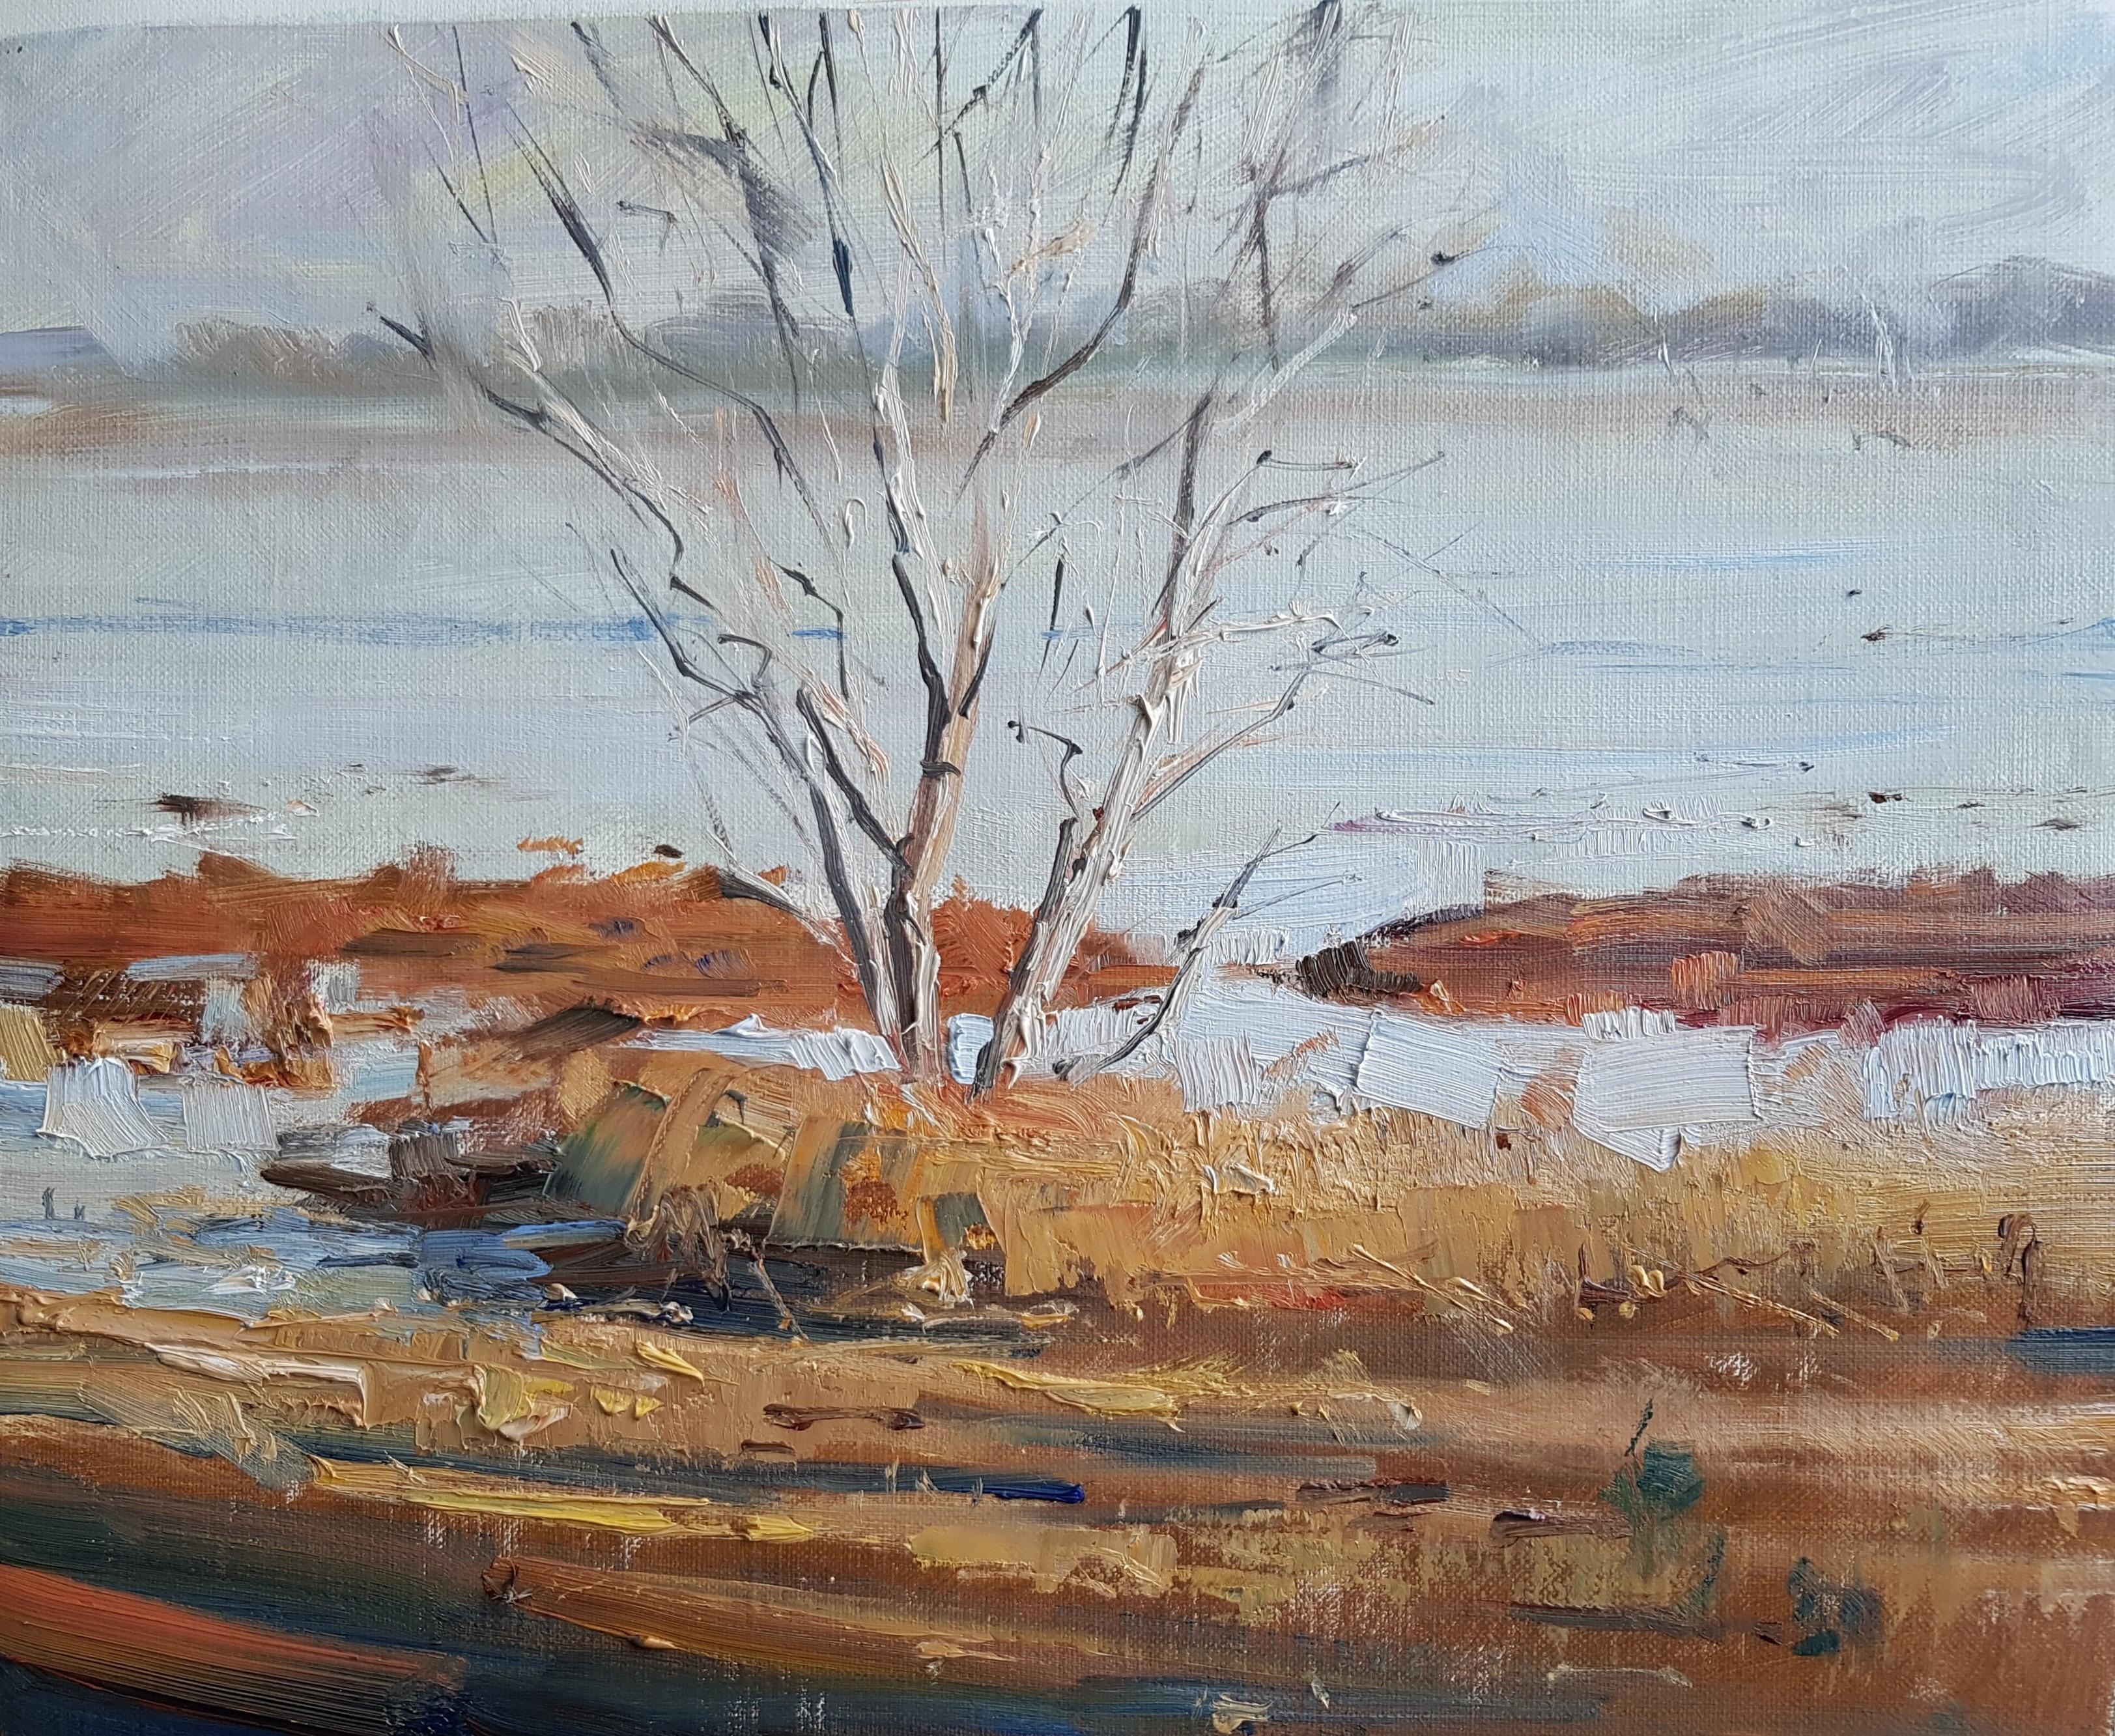 Oil painting of a dead tree in a river